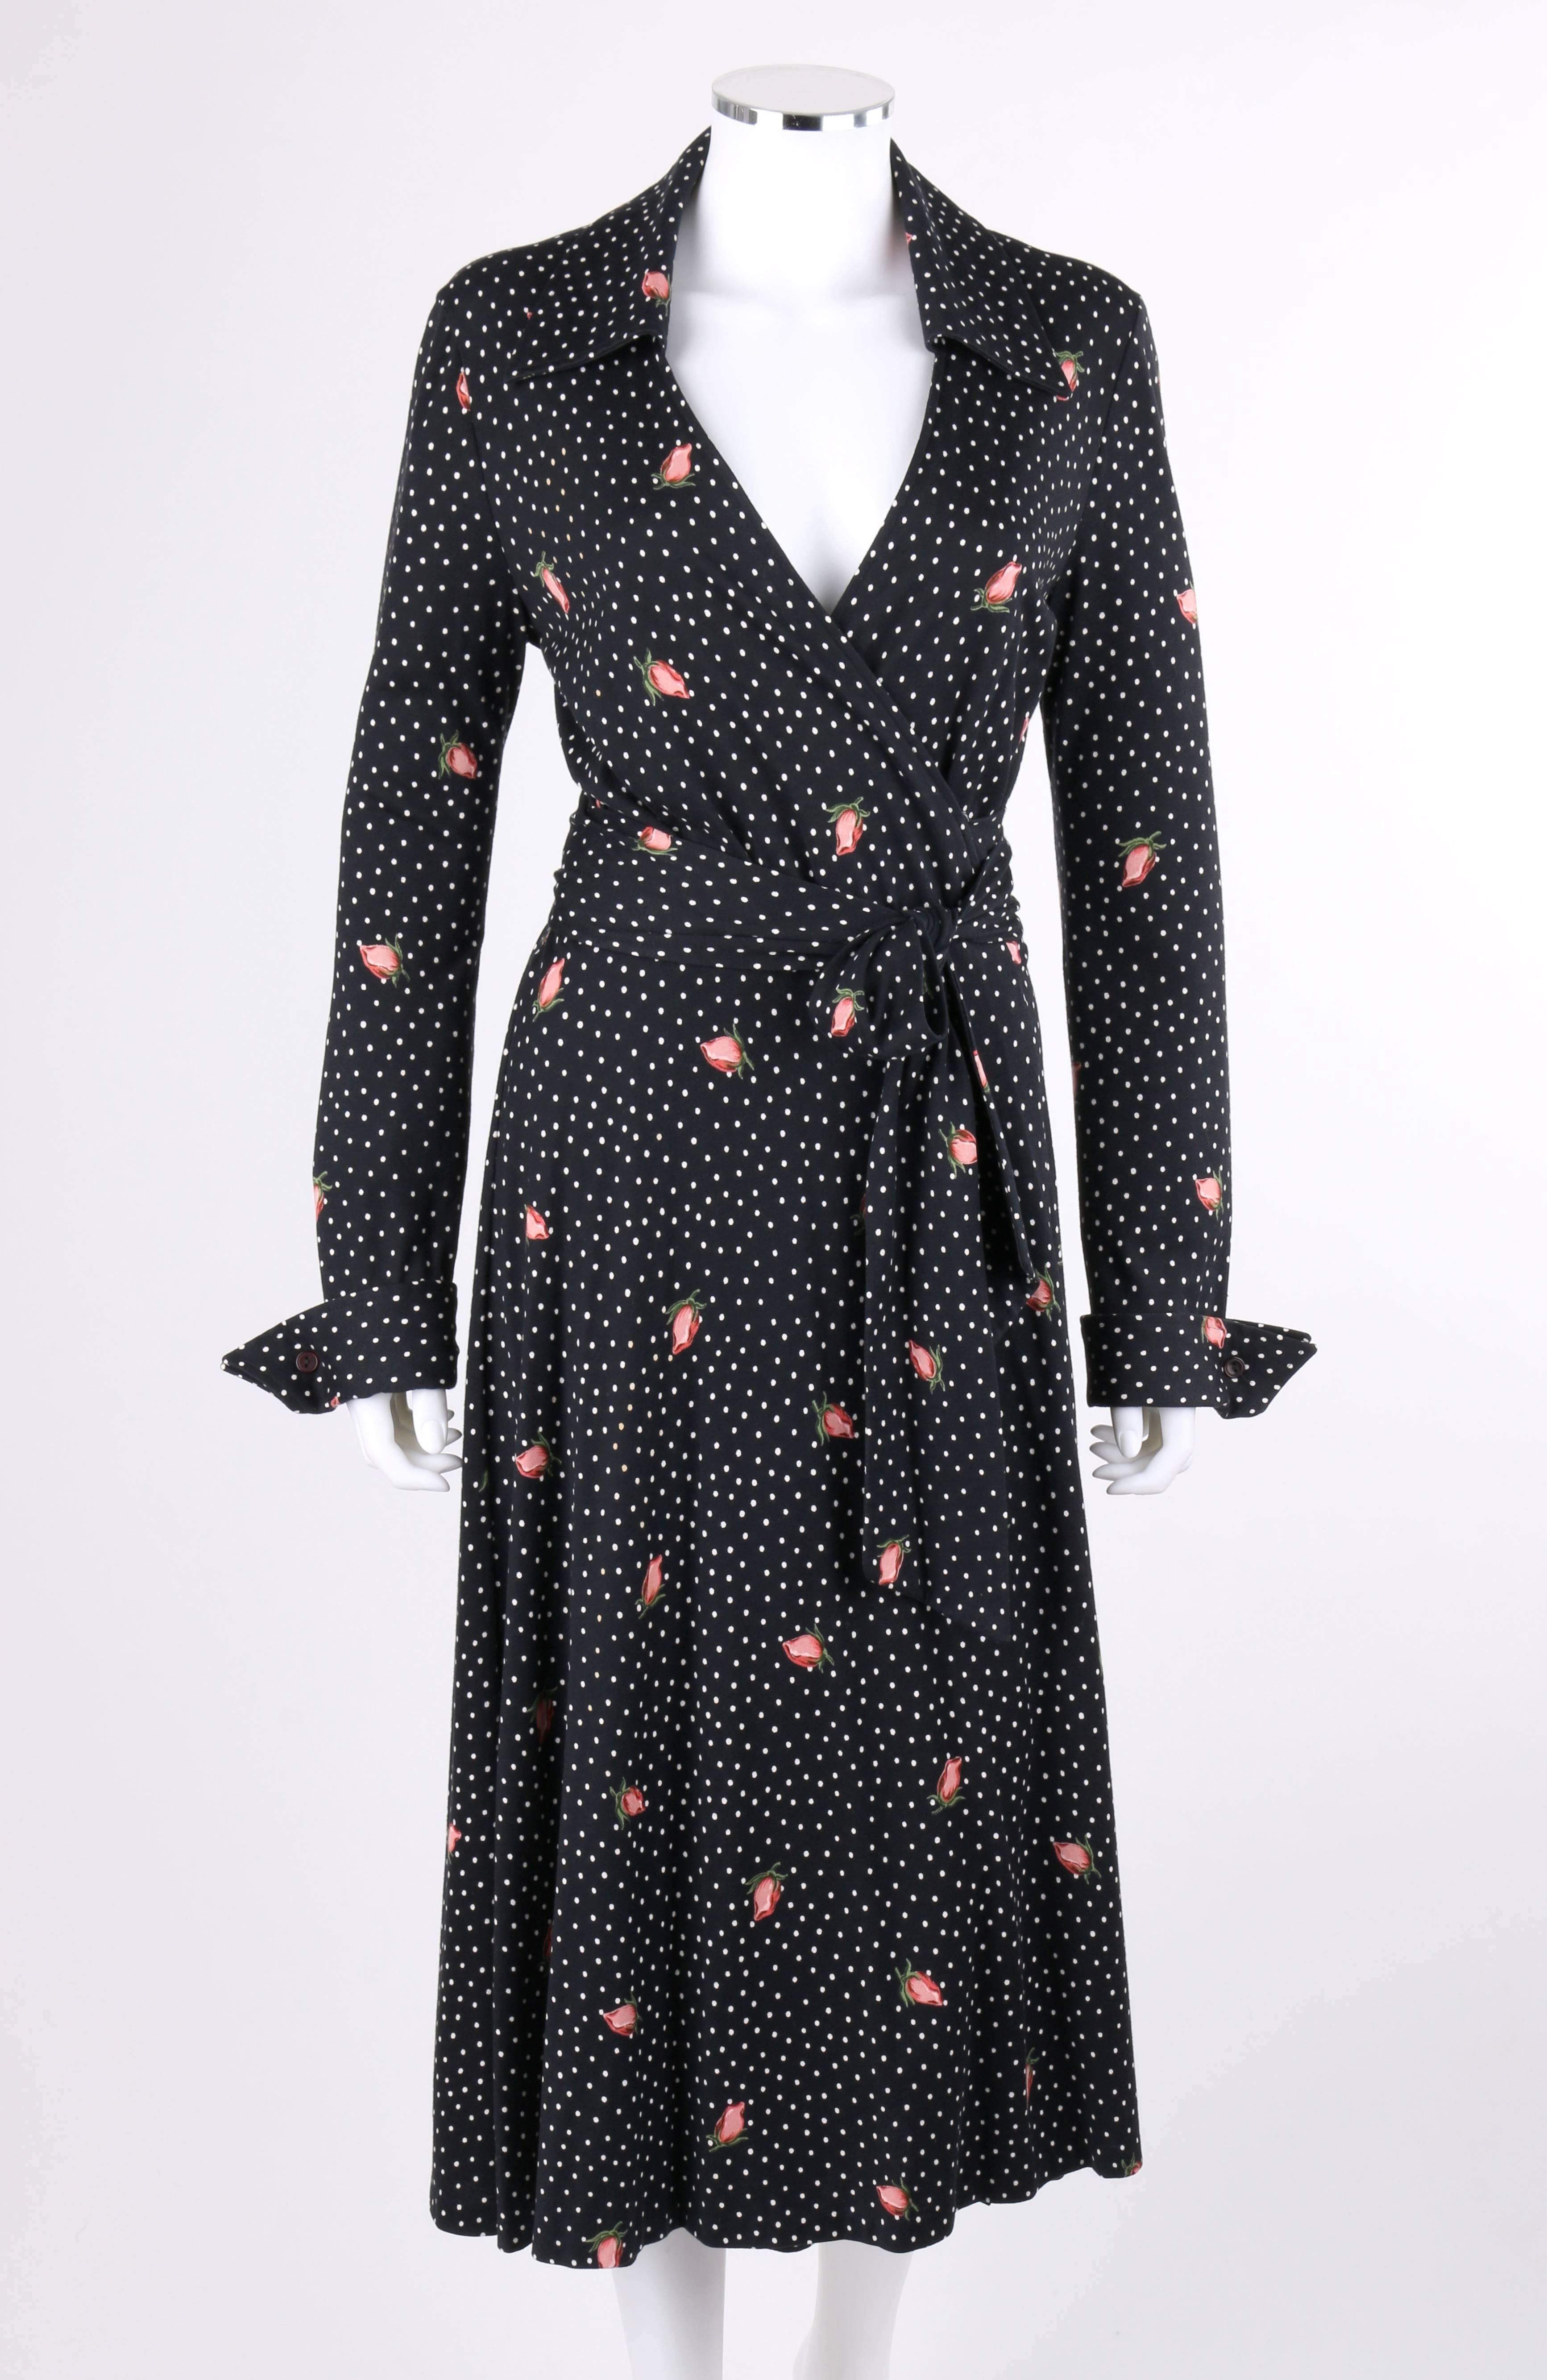 Vintage Diane Von Furstenberg DVF c.1970's polkadot and floral (rosebud) print knit iconic wrap dress. Same print wore by Diane Von Furstenberg herself in 1977. Pink rose bud on black and white polkadot all over print. Shirt collar. Long sleeves.